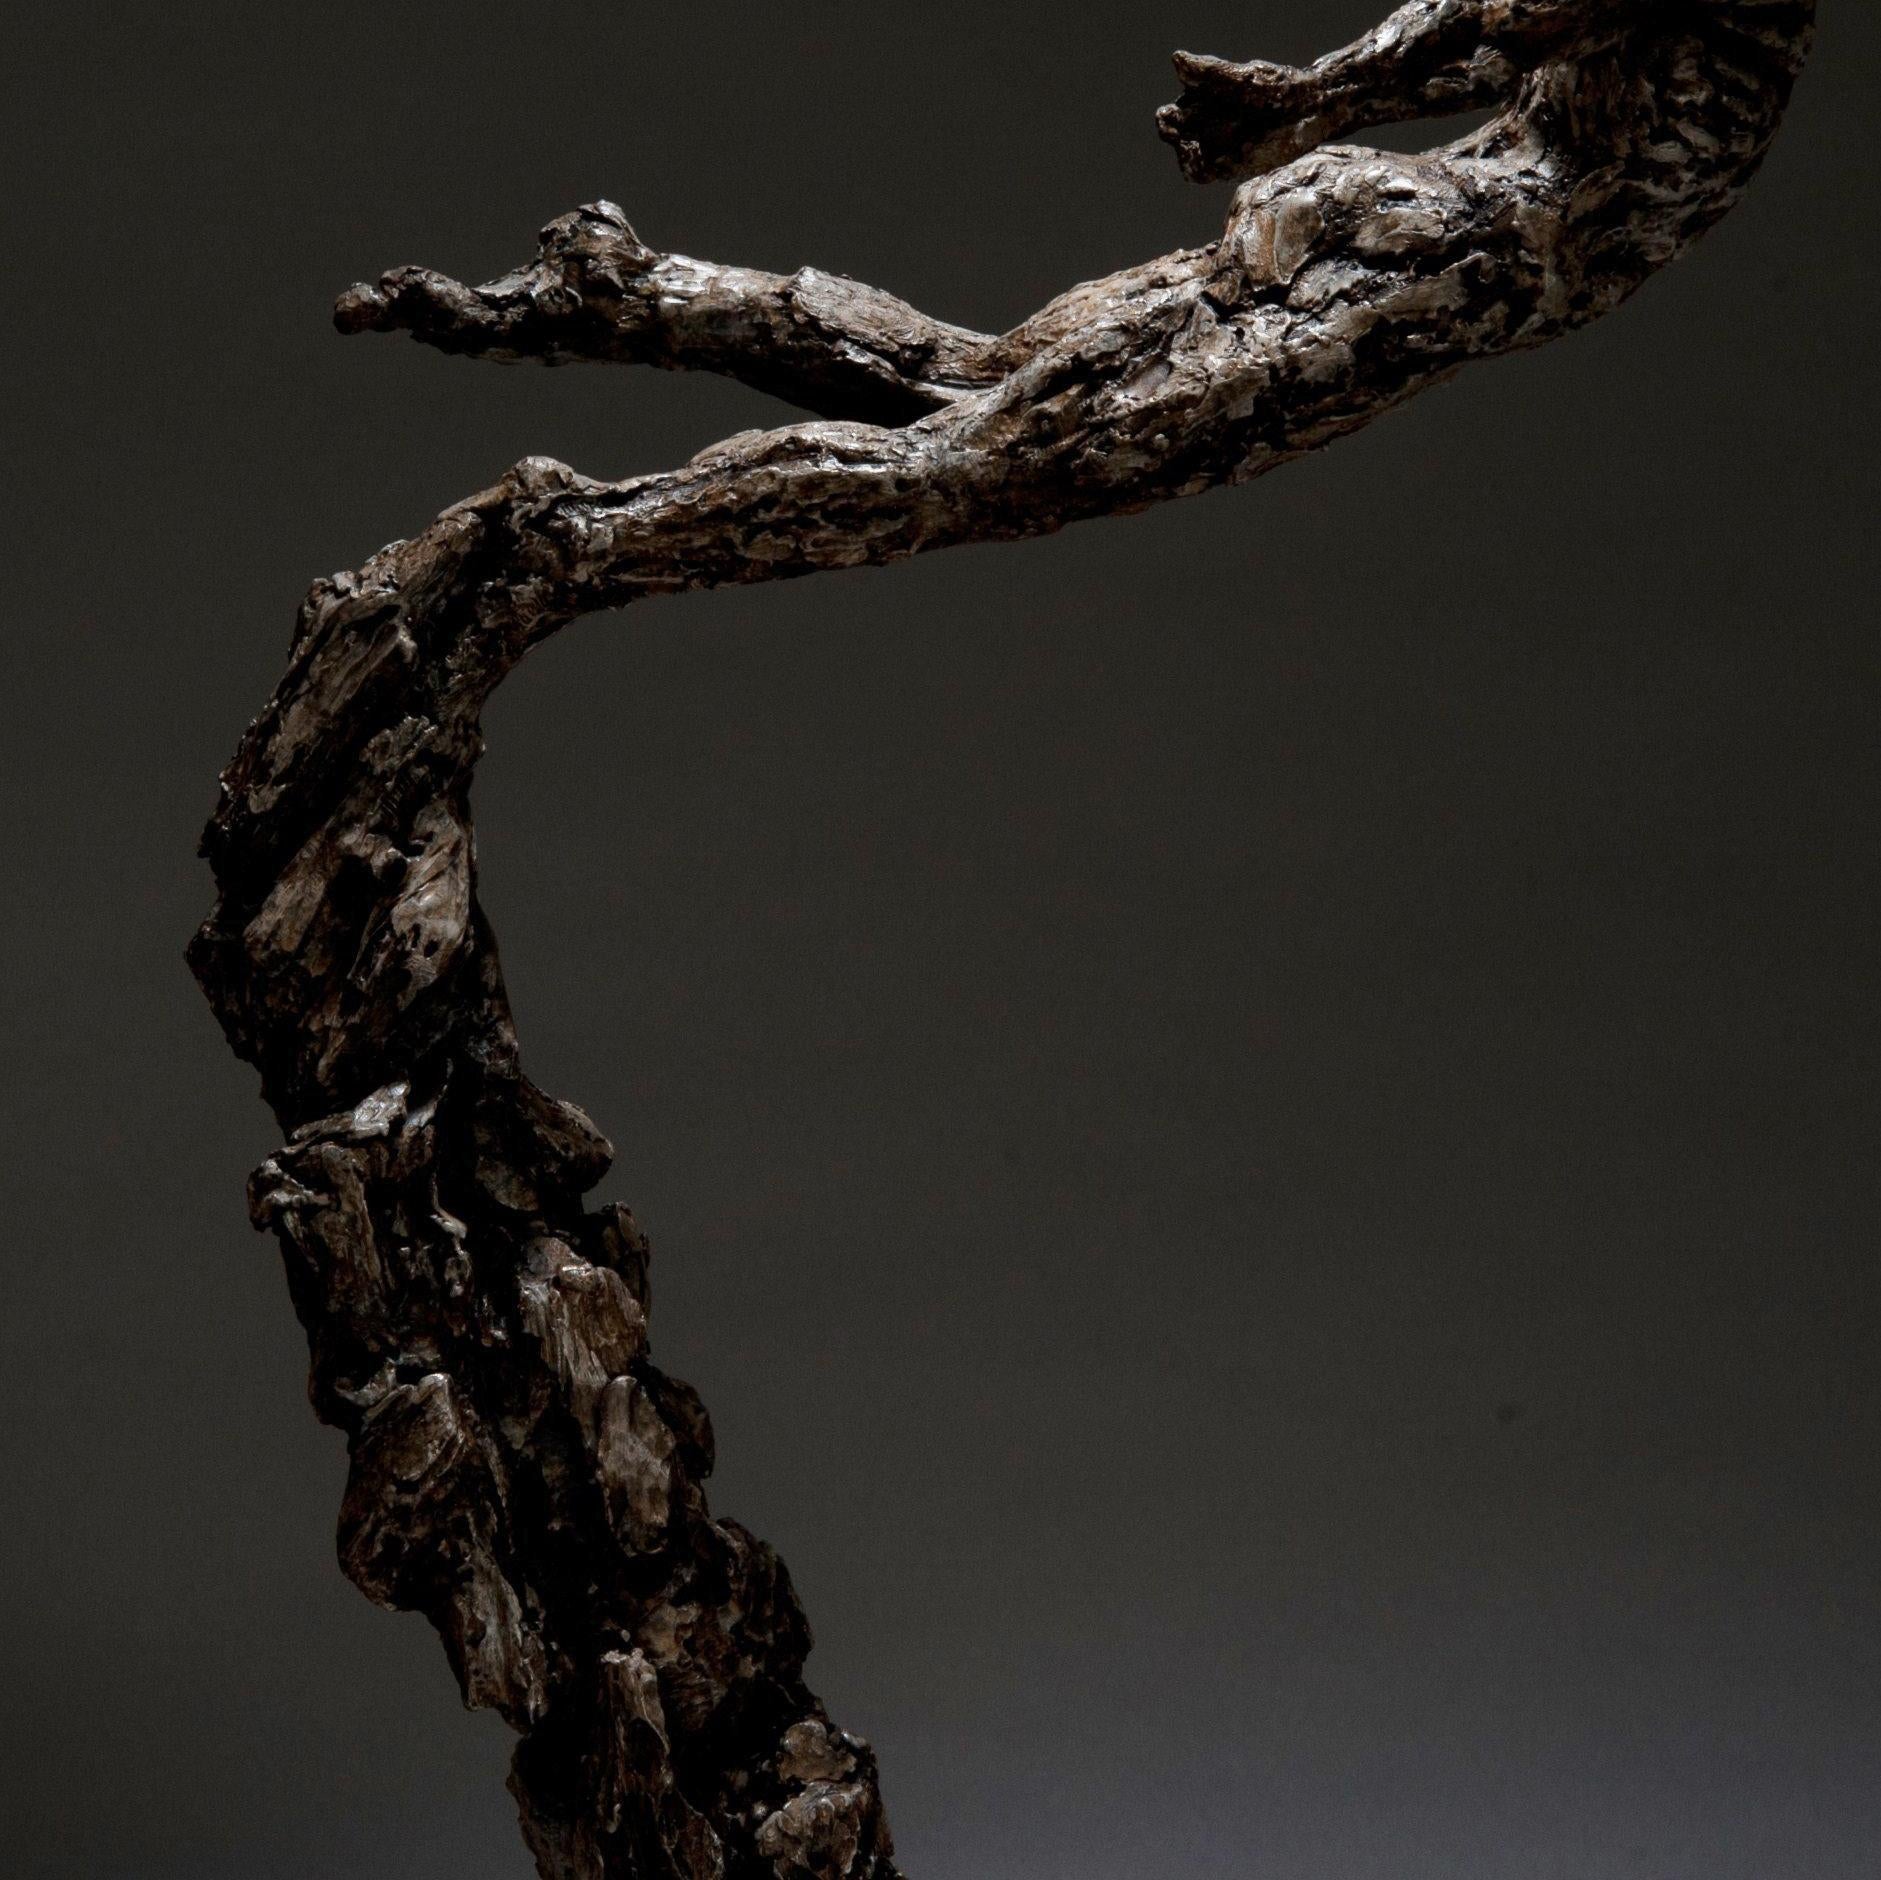 Ian Edwards - Born	within Fire - Original Signed Bronze Sculpure
Dimensions: 155 x 80 x 50 cm 
Edition of 12	

Edwards’ practice expresses the power and determination of human endeavour. He
draws inspiration from natural forces, with his powerful